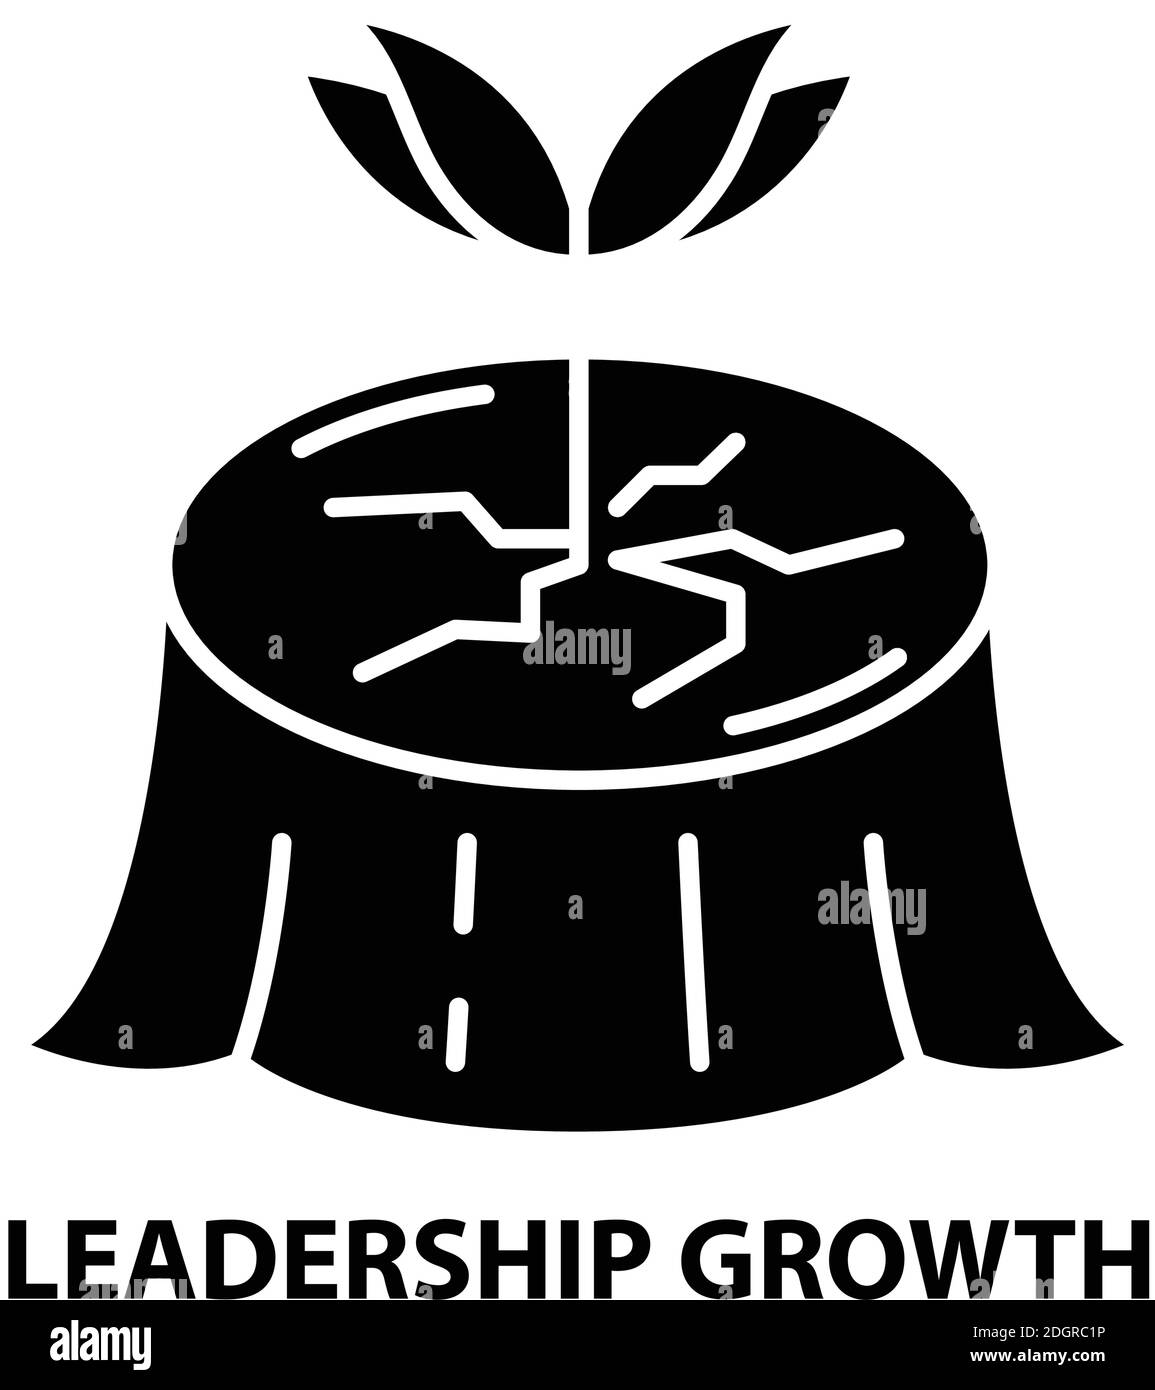 leadership growth icon, black vector sign with editable strokes, concept illustration Stock Vector